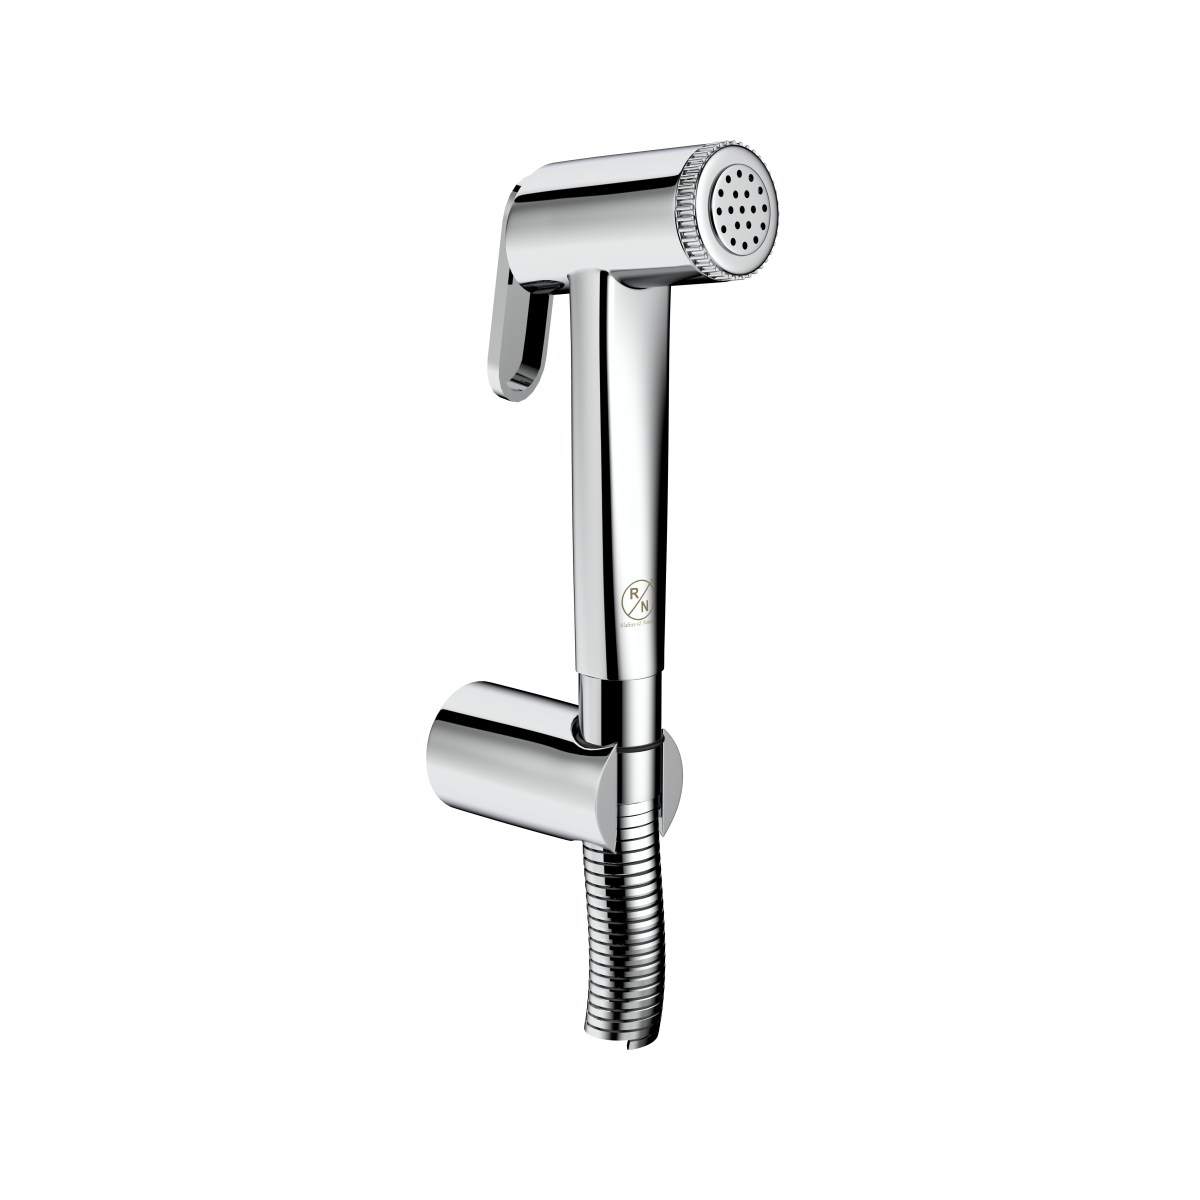 RN Health Faucet Set (With 1Mtr. Tube)